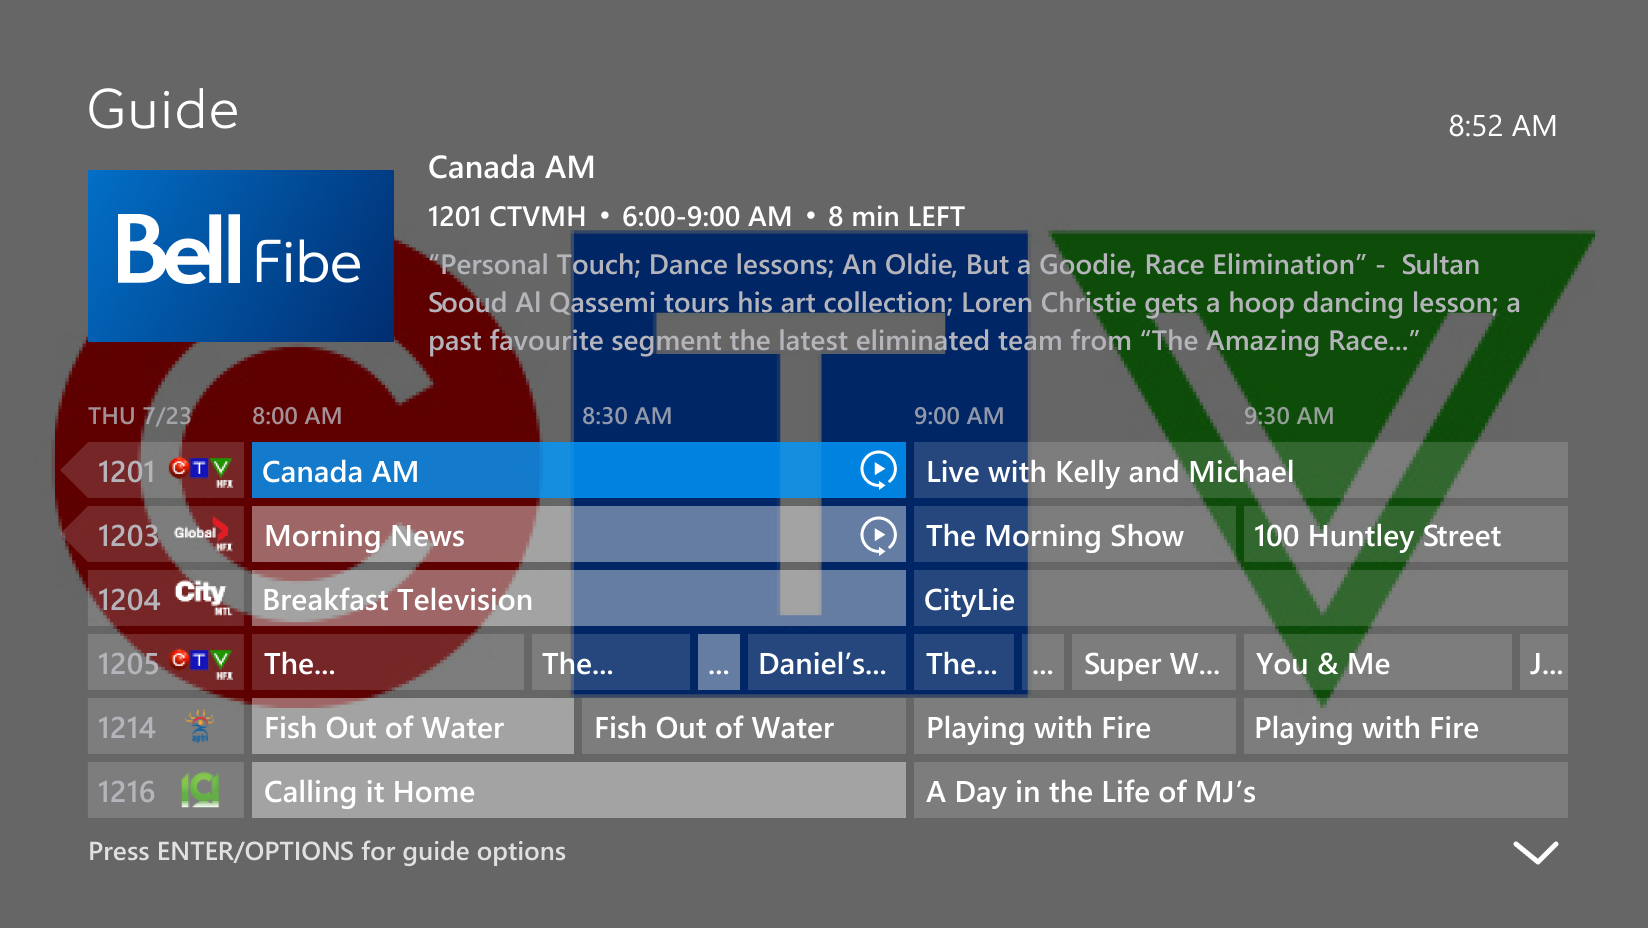 The channel guide is displayed.